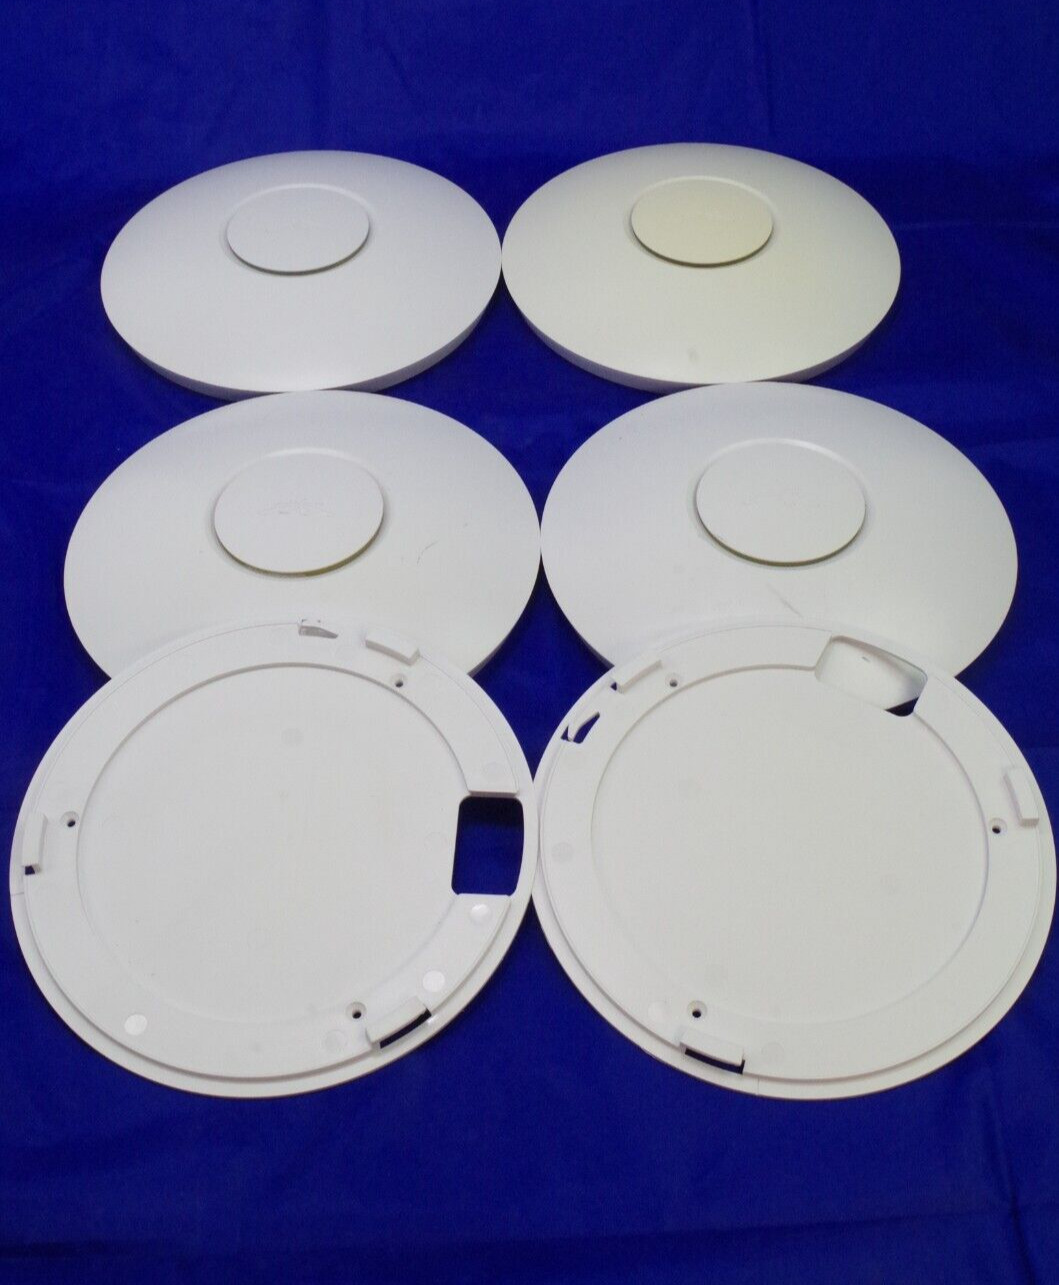 Lot Of 4 Ubiquiti Unifi AP Access Points  UNTESTED SOLD AS IS